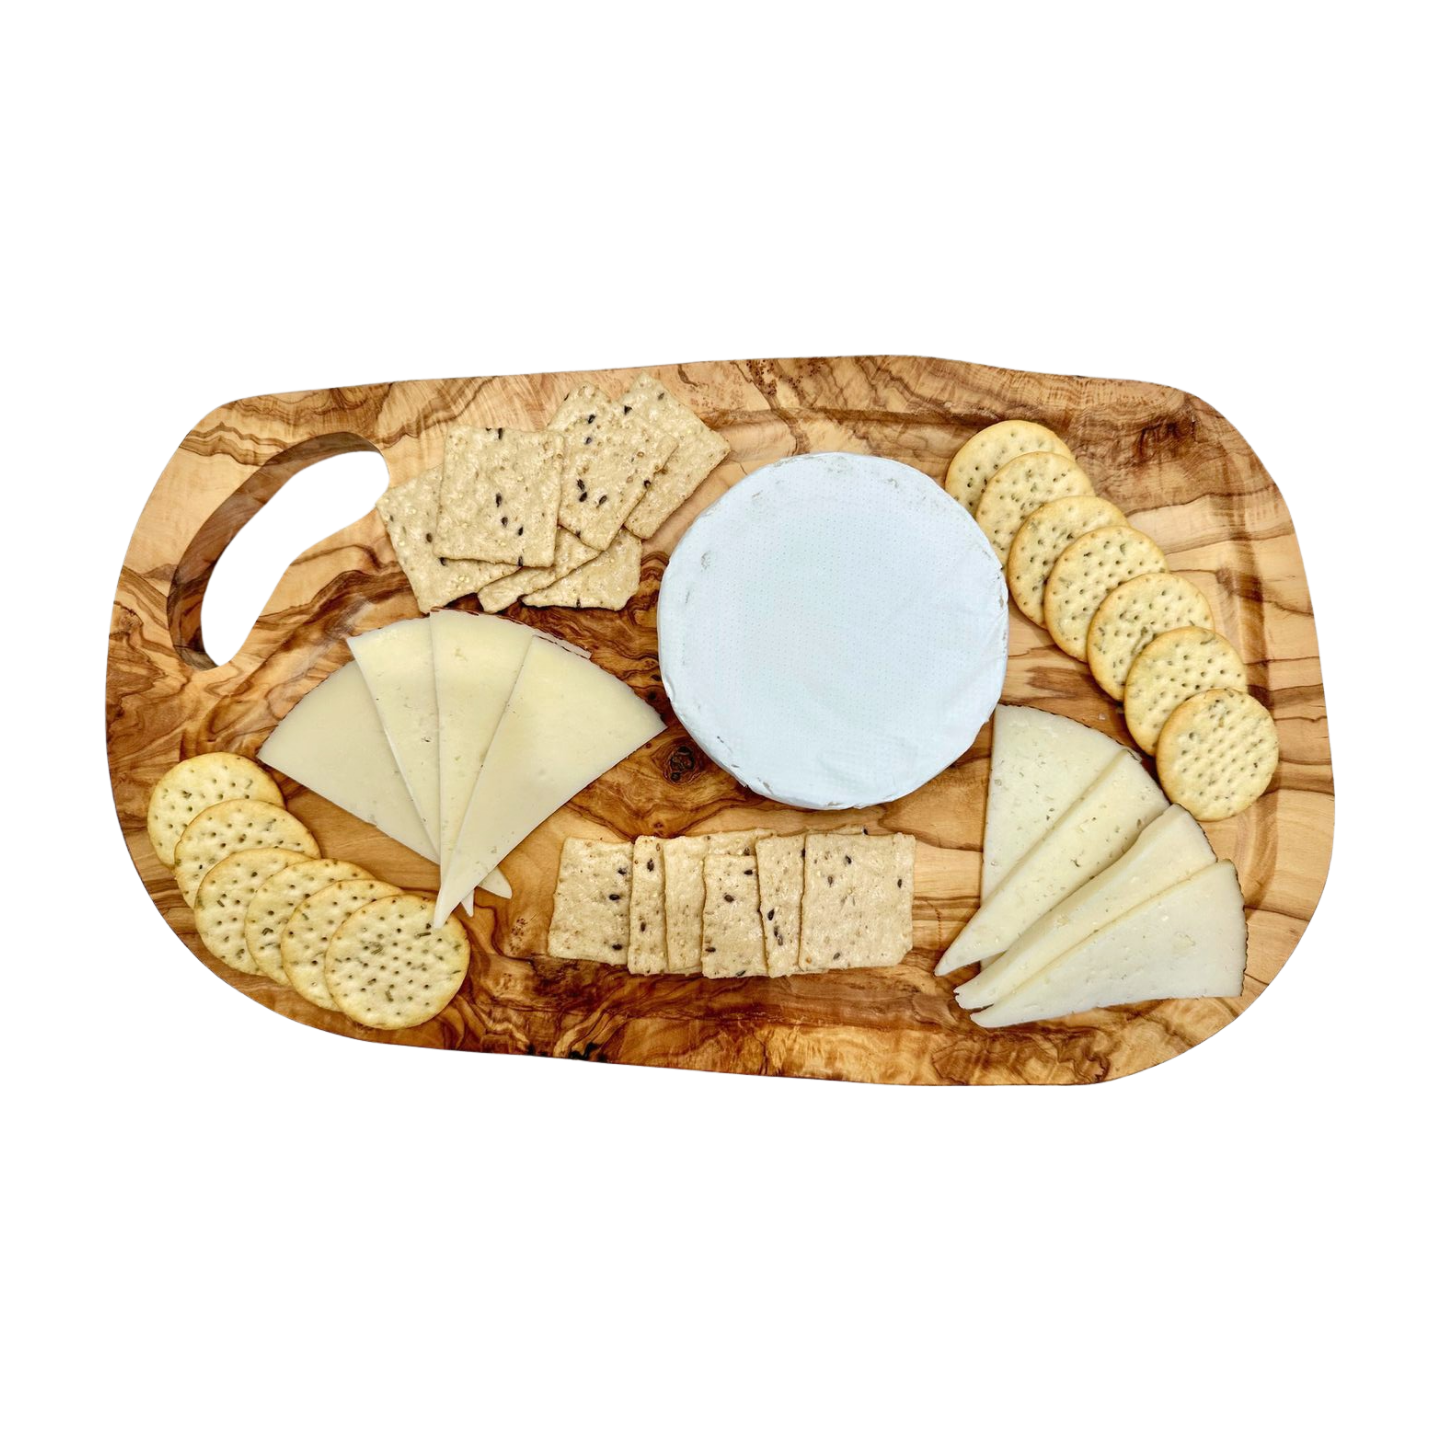 Large olive wood carving board, shown here being used for charcuterie with a selection of cheeses and crackers. Imported from Germany.